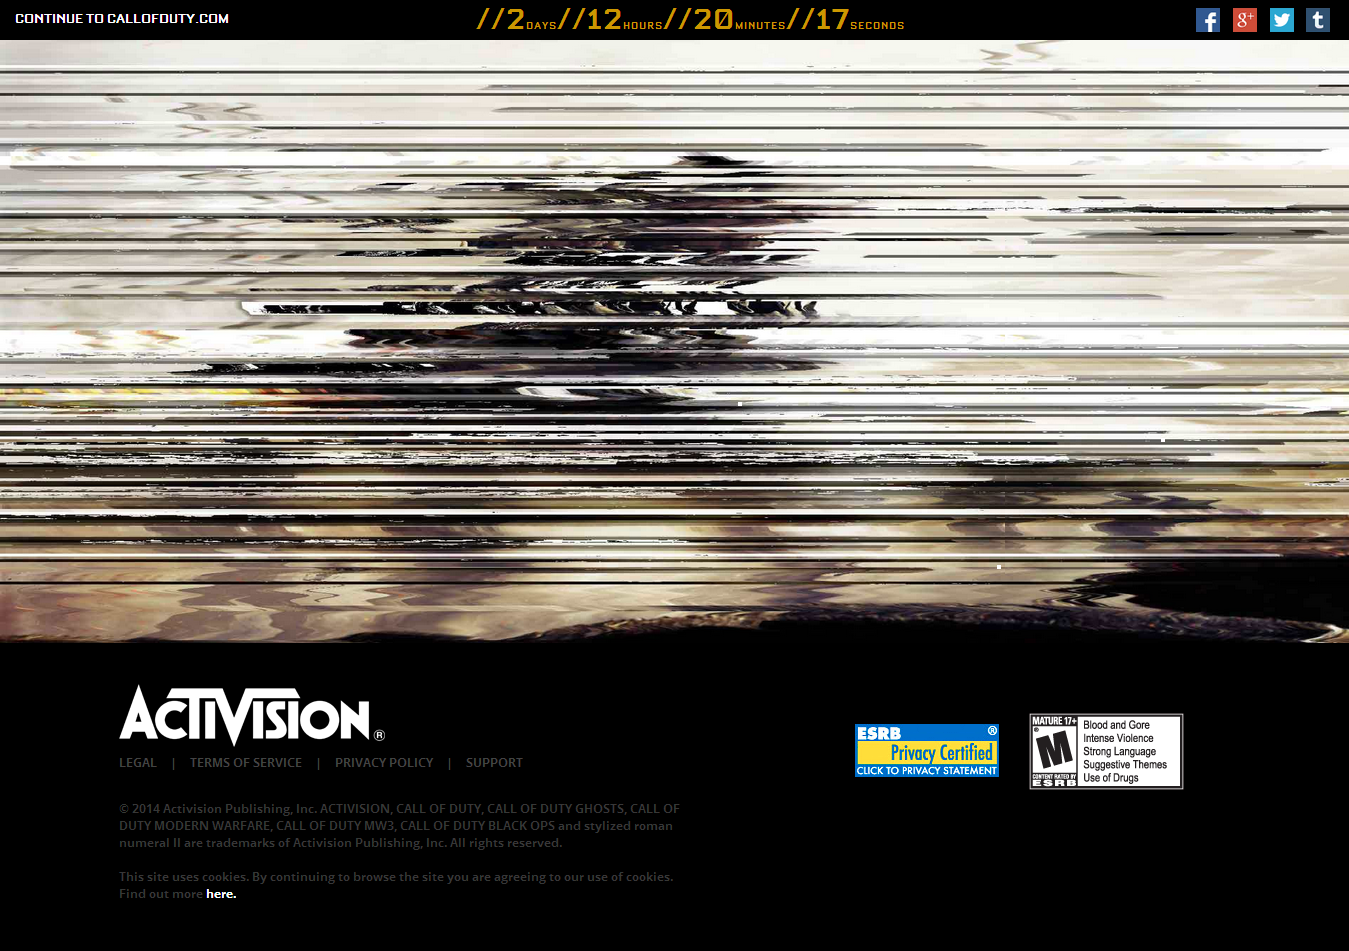 Get Ready for a New Era of Call of Duty® e1398961142914 - New Call of Duty game reveal dated for 4th May by Activison